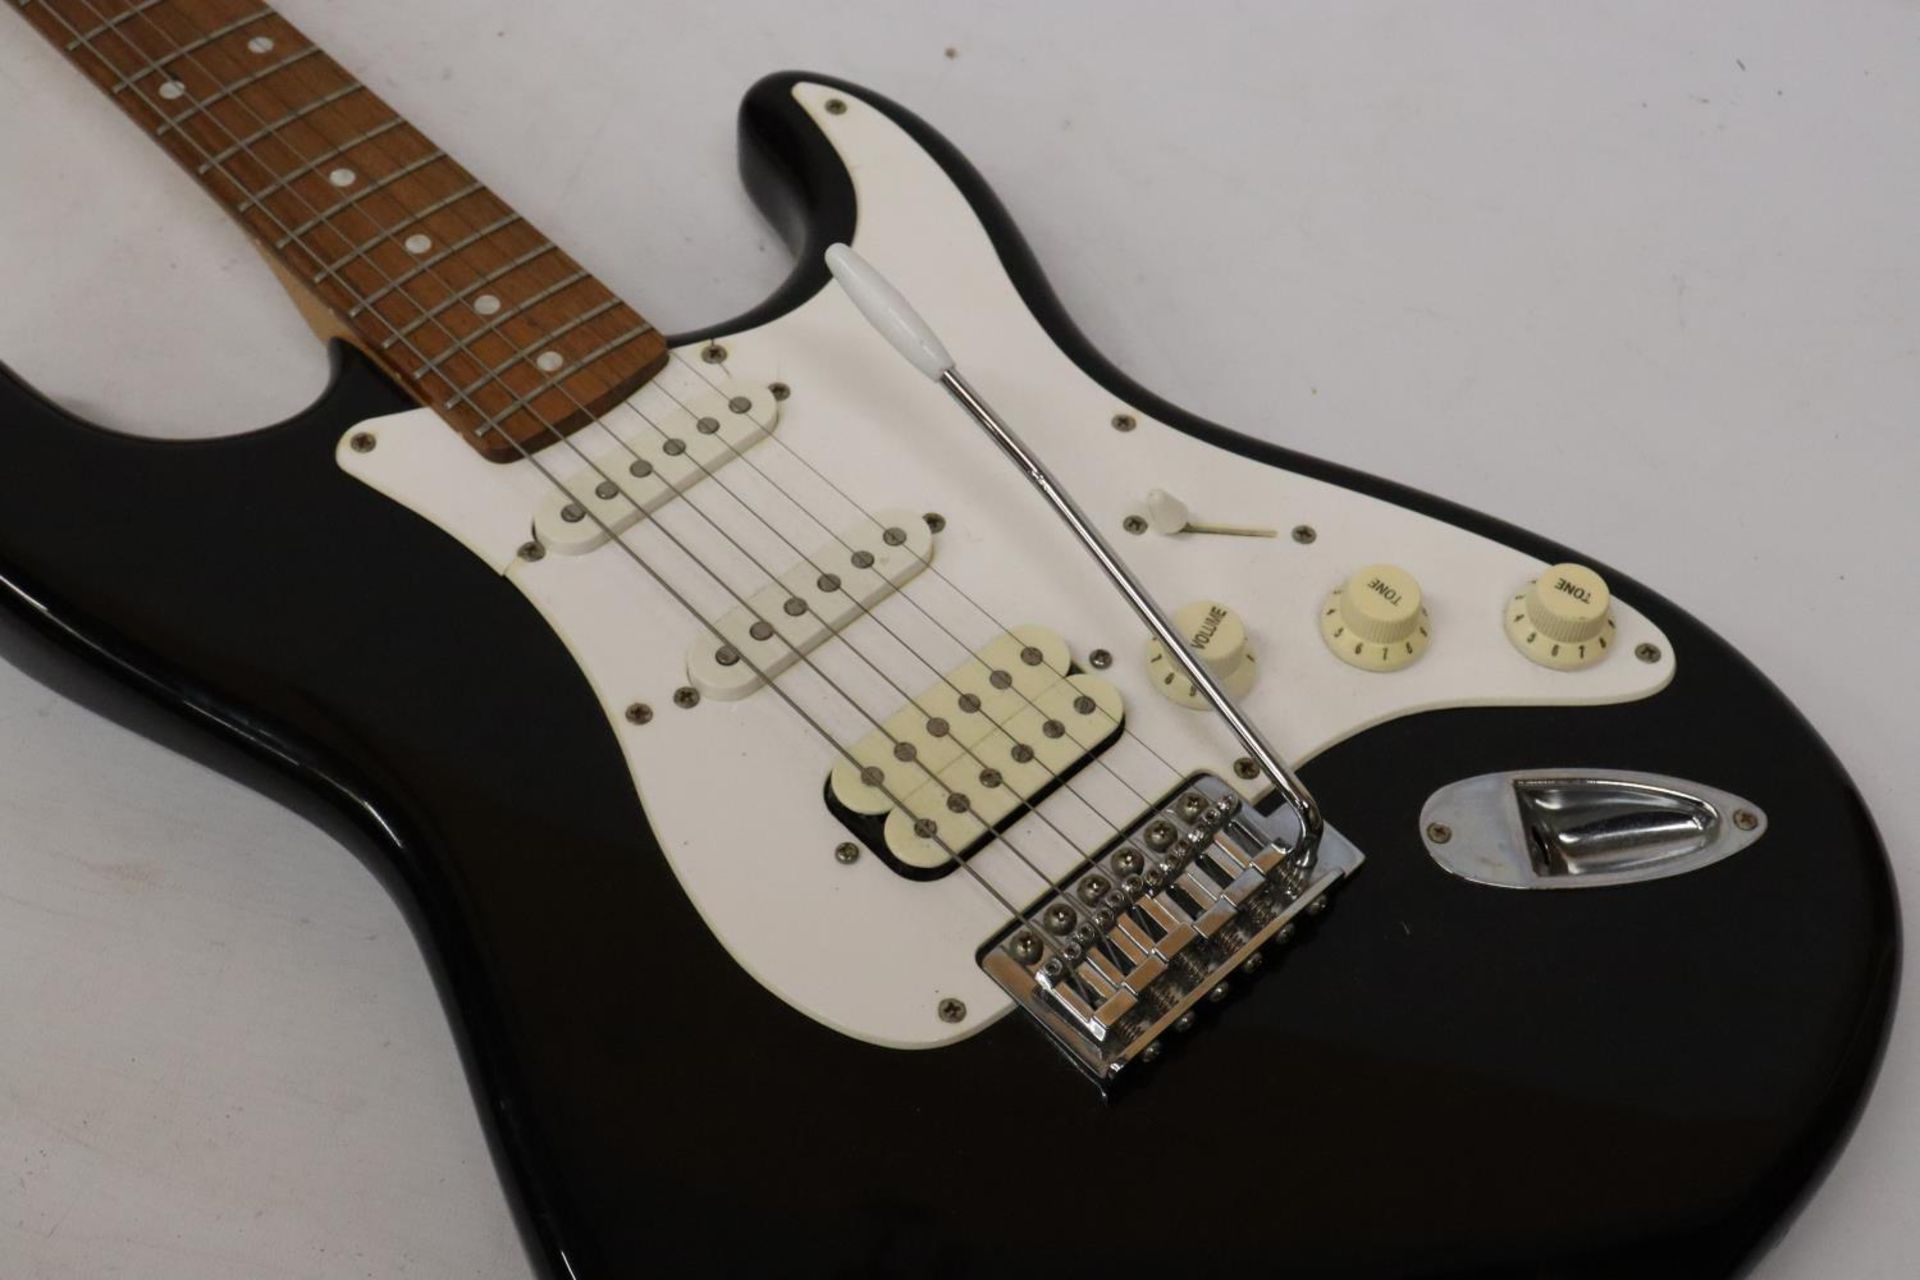 A SQUIER STRAT FENDER ELECTRIC GUITAR - Image 4 of 6